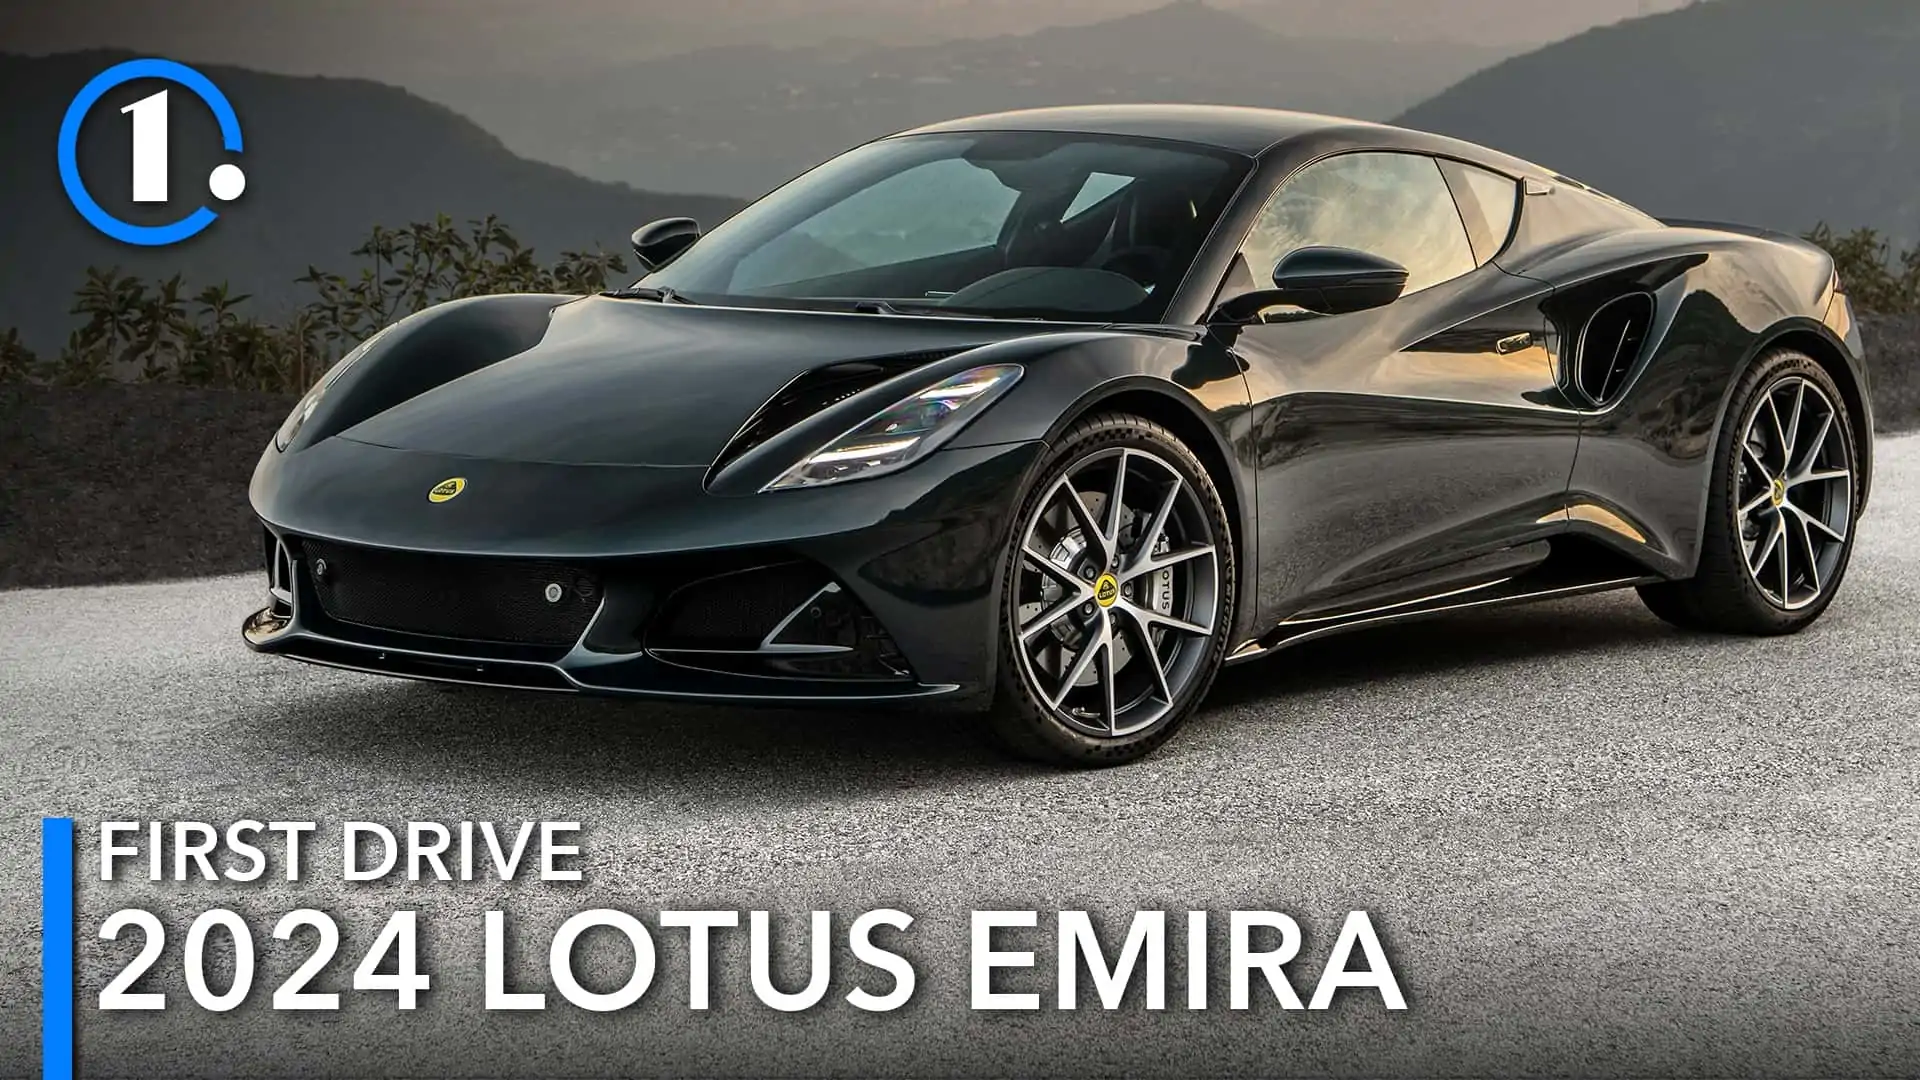 Lotus Emira V6 First Edition Road Test: The most fun for $100,000